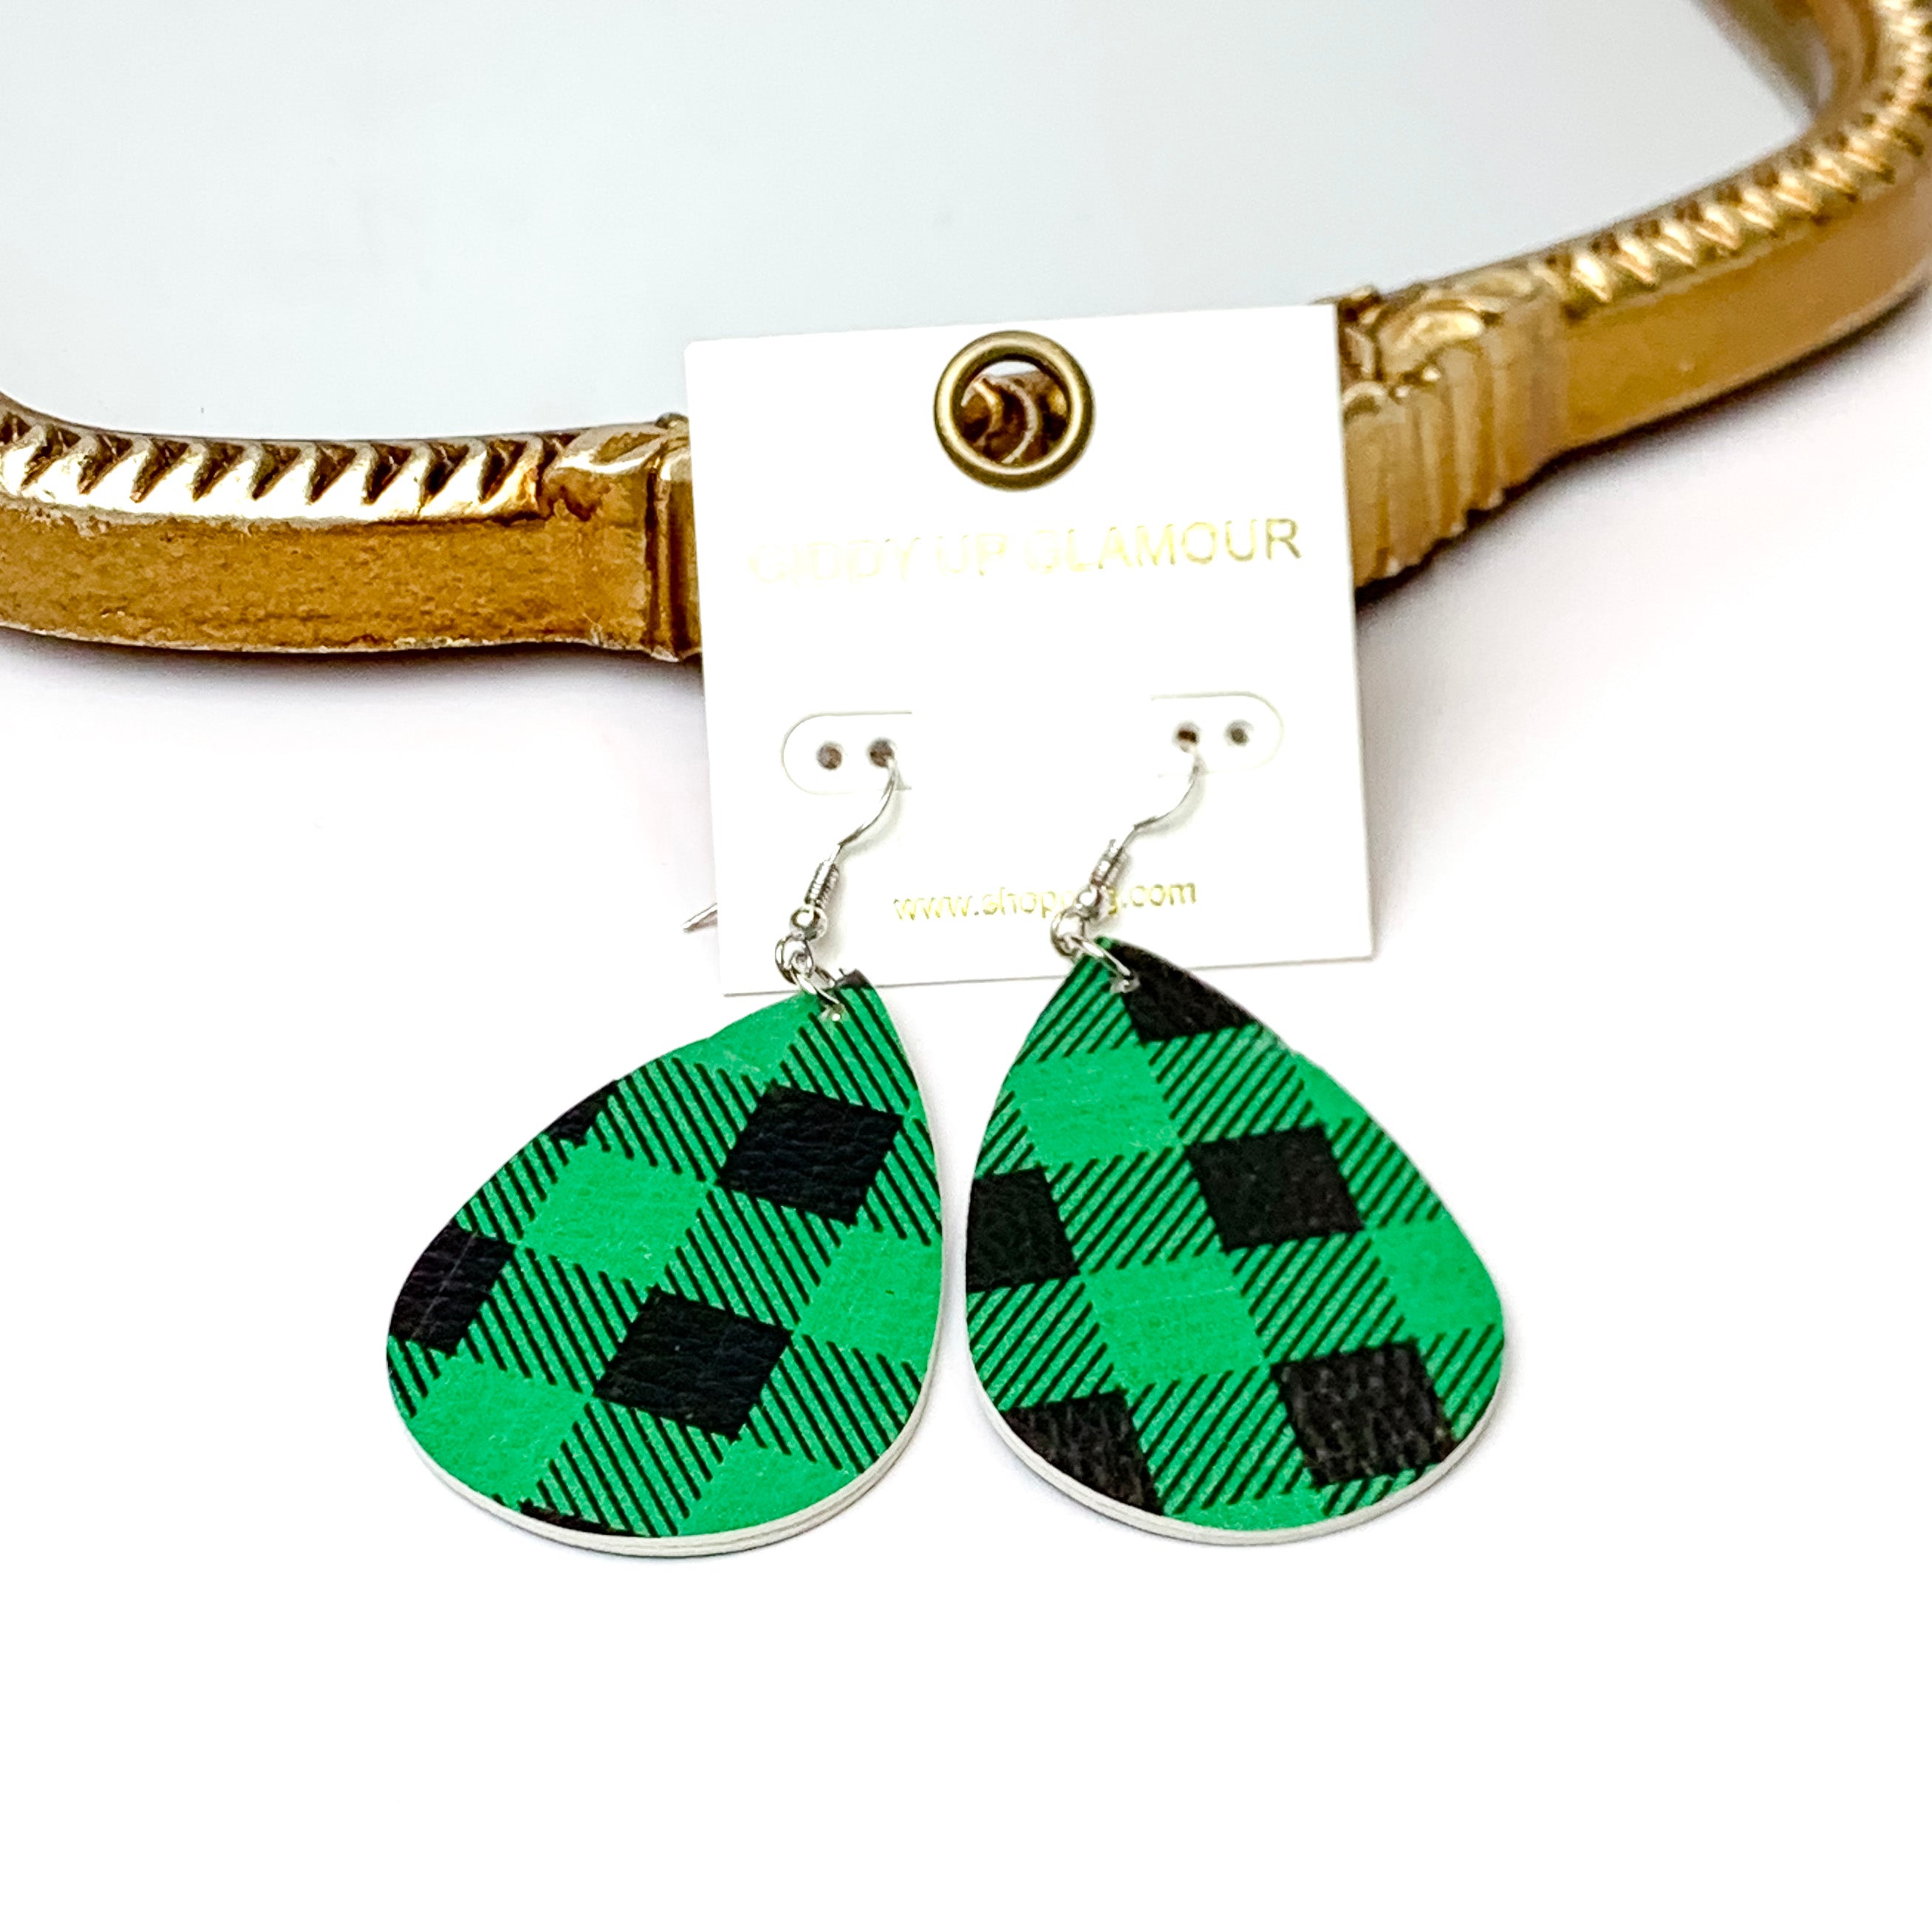 Buffalo Plaid Leather Layered Teardrop Earrings in Green - Giddy Up Glamour Boutique